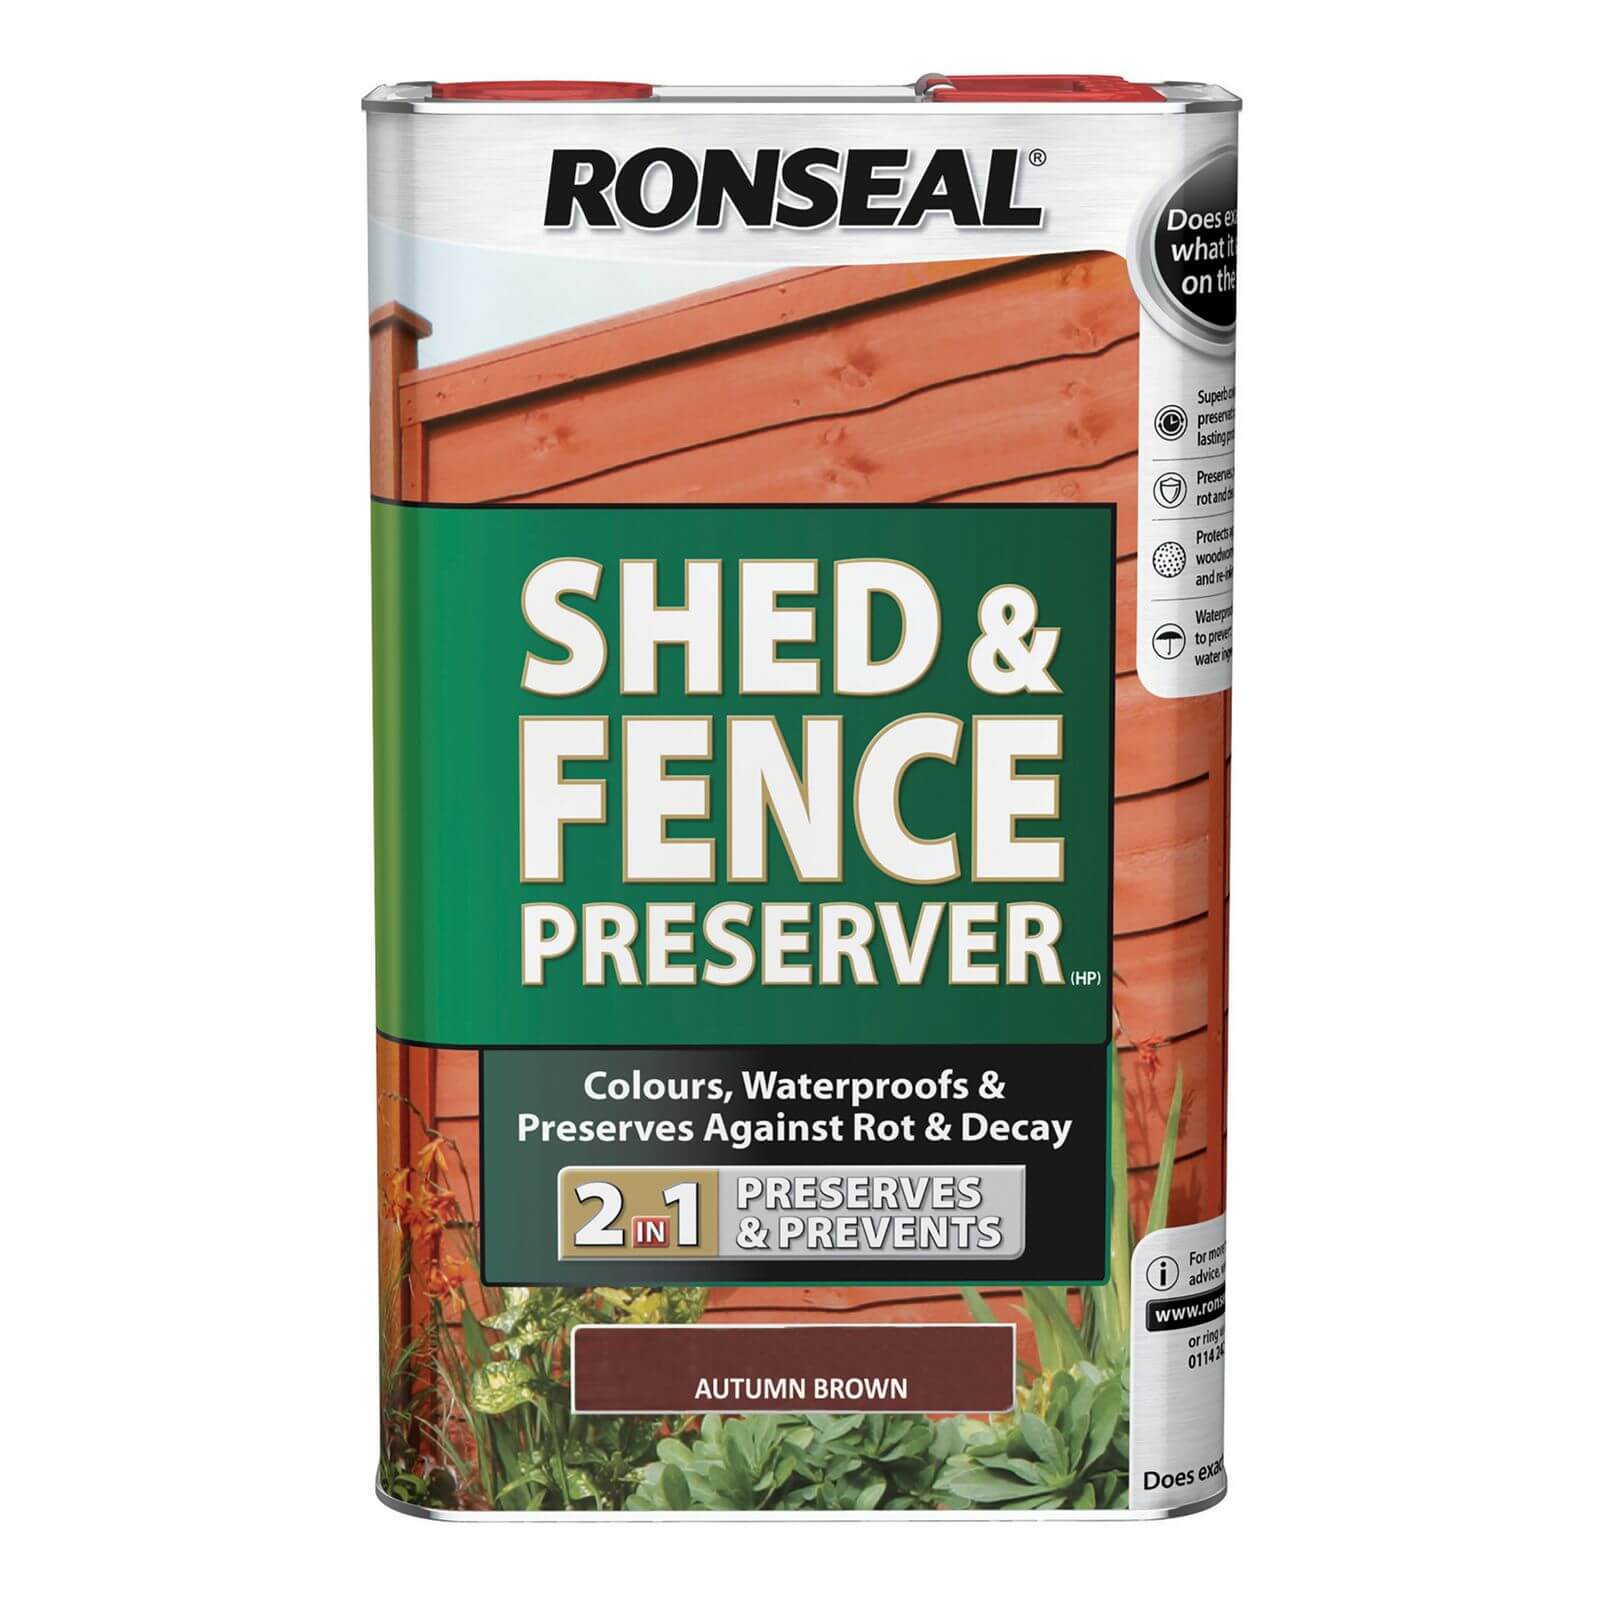 Ronseal Shed & Fence Preserver Autumn Brown - 5L